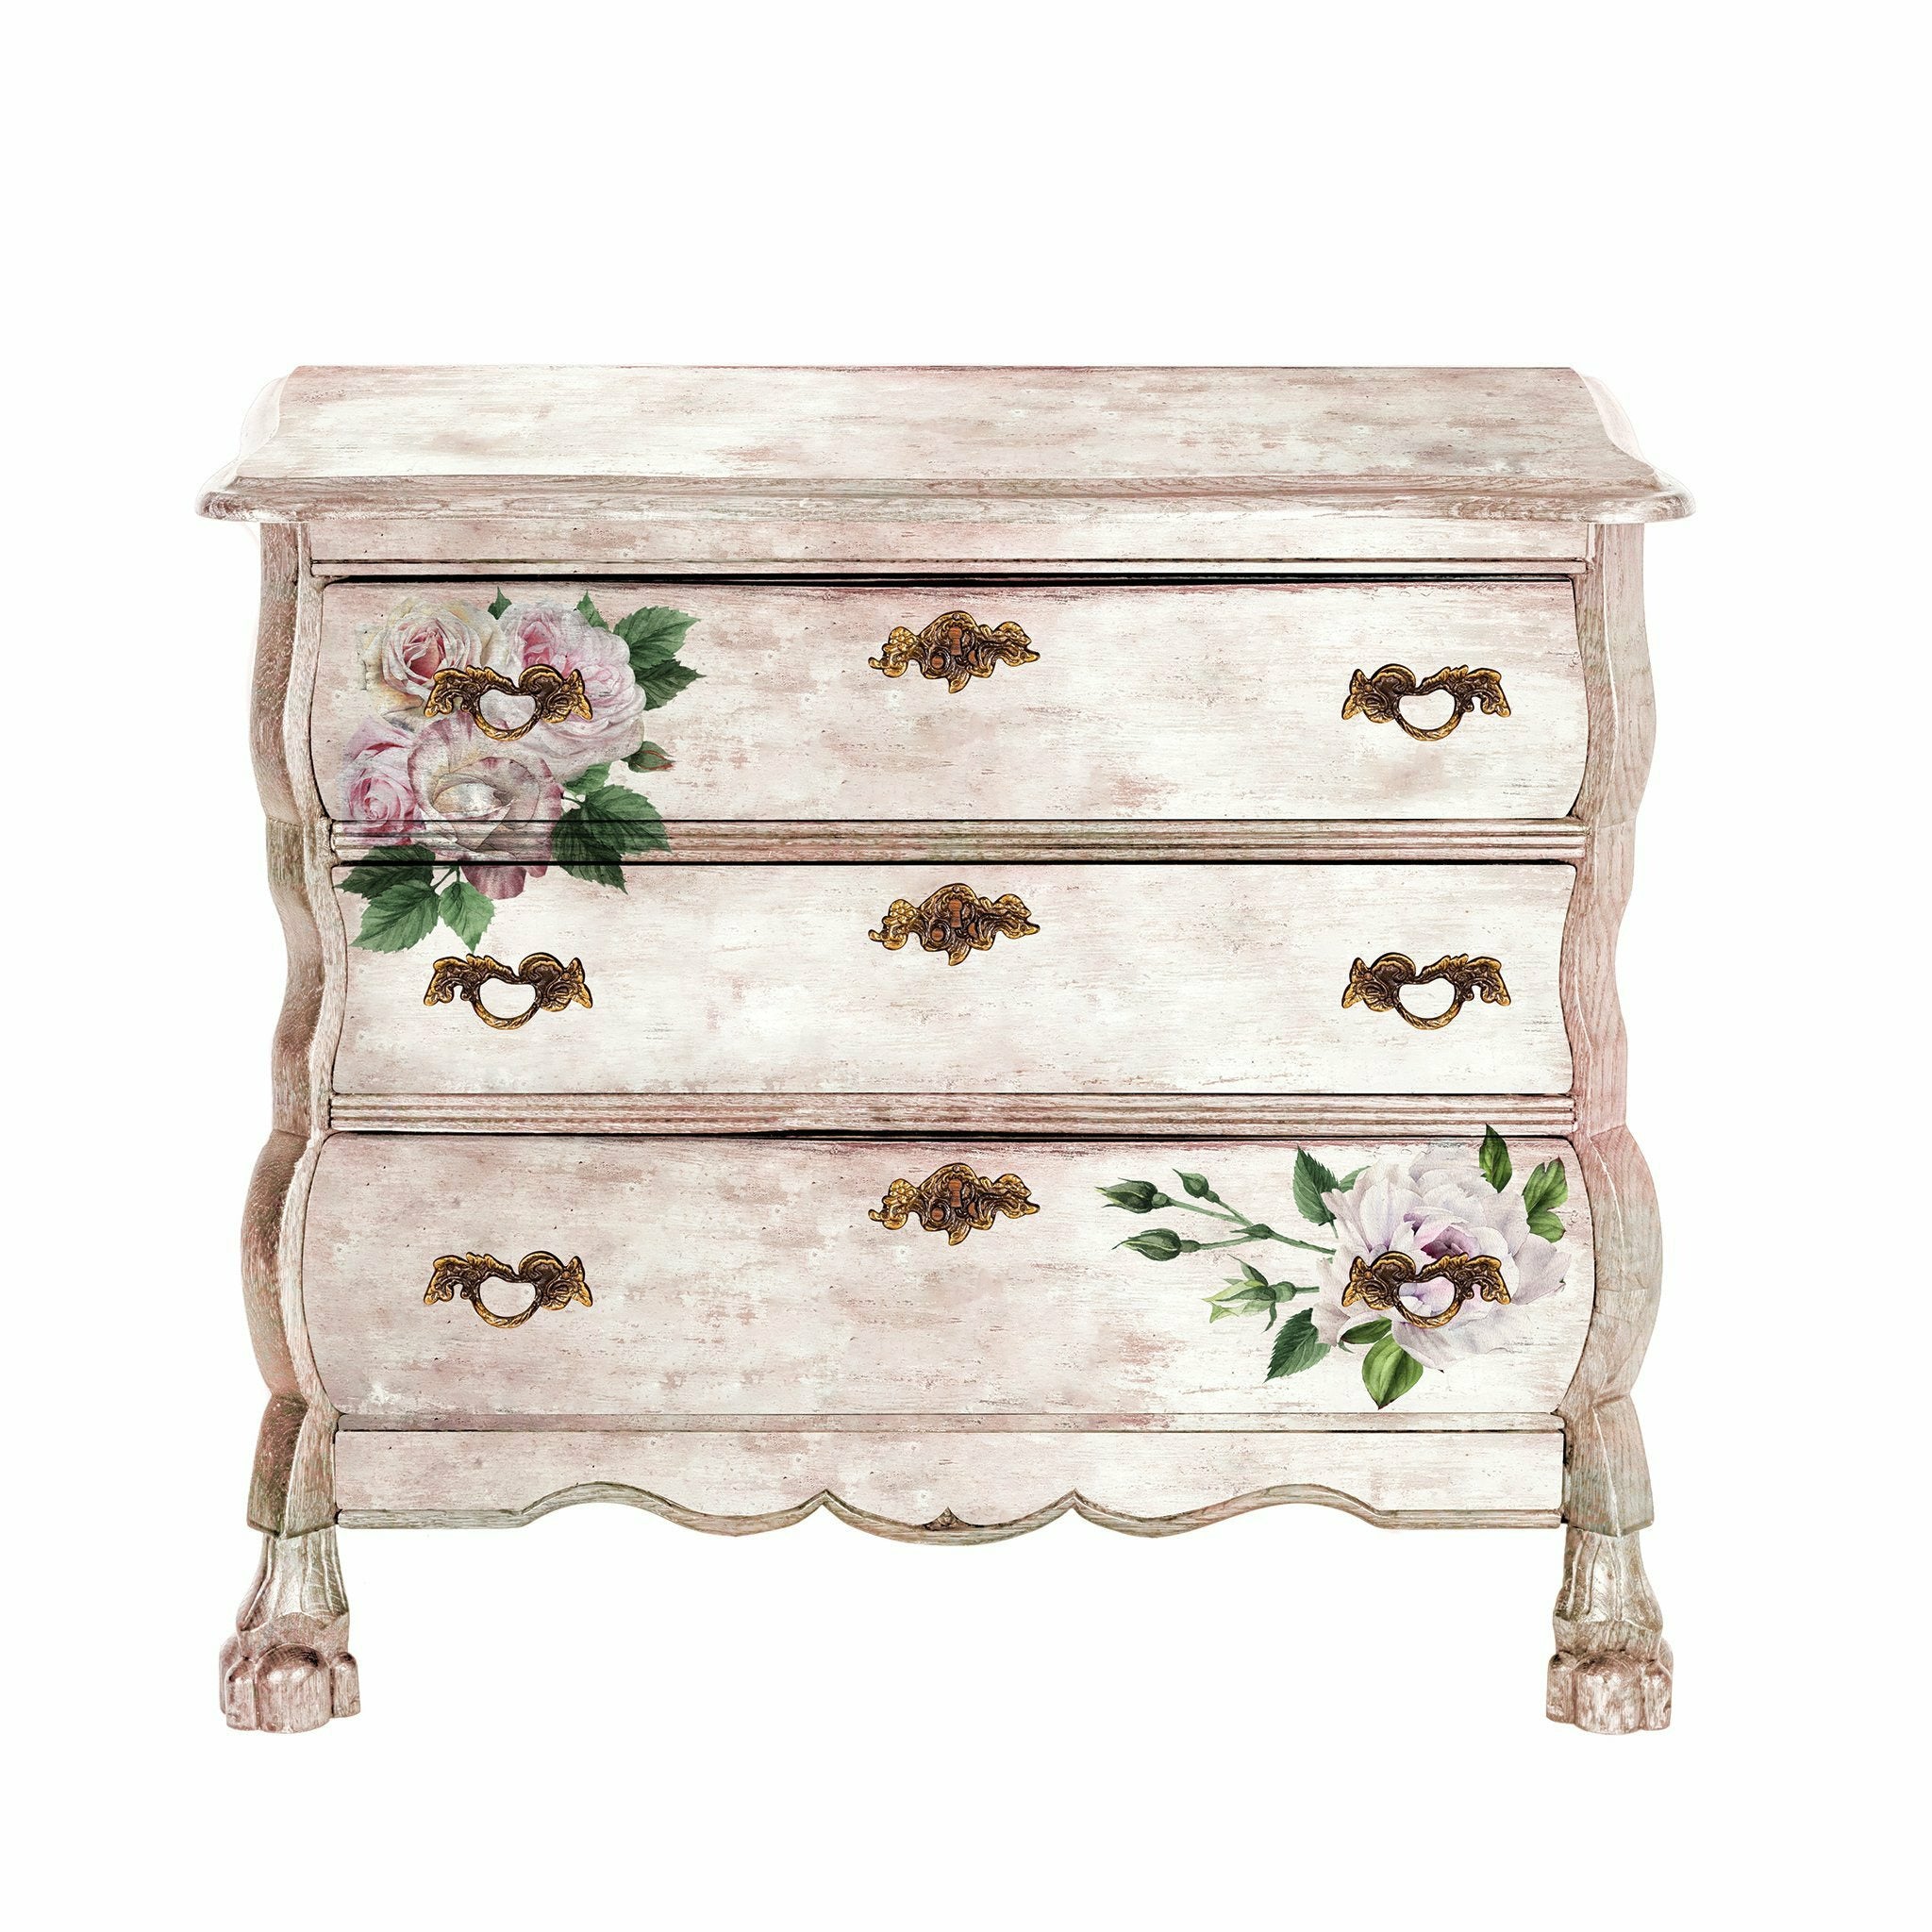 A pink vintage dresser with a cluster of roses on the top left corner and right bottom corner.